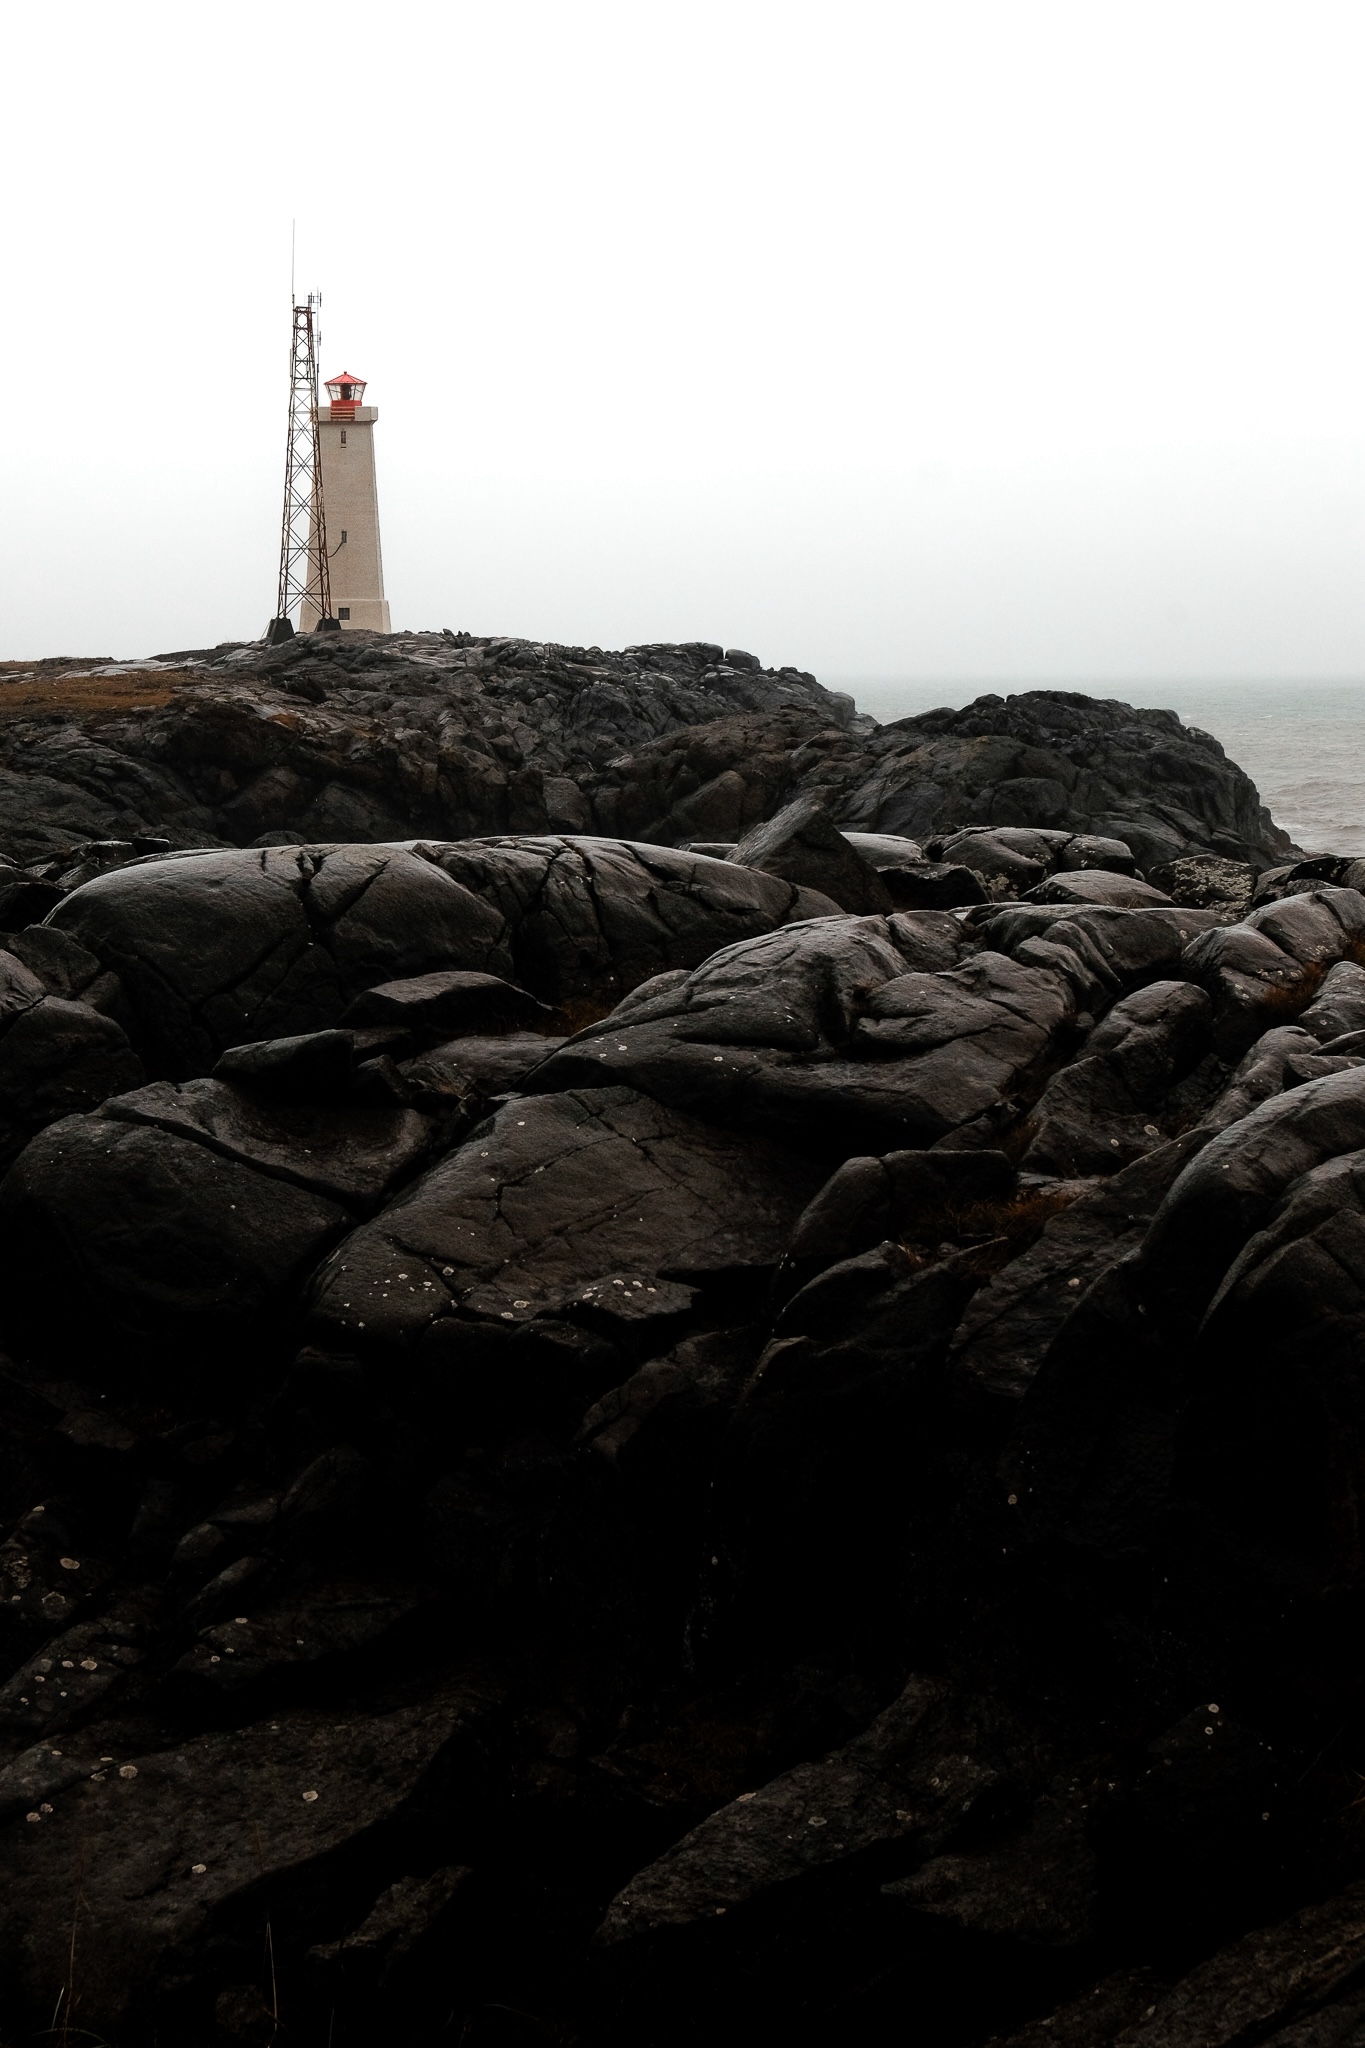 Black rocks with a white lighthouse in the distance against the sea